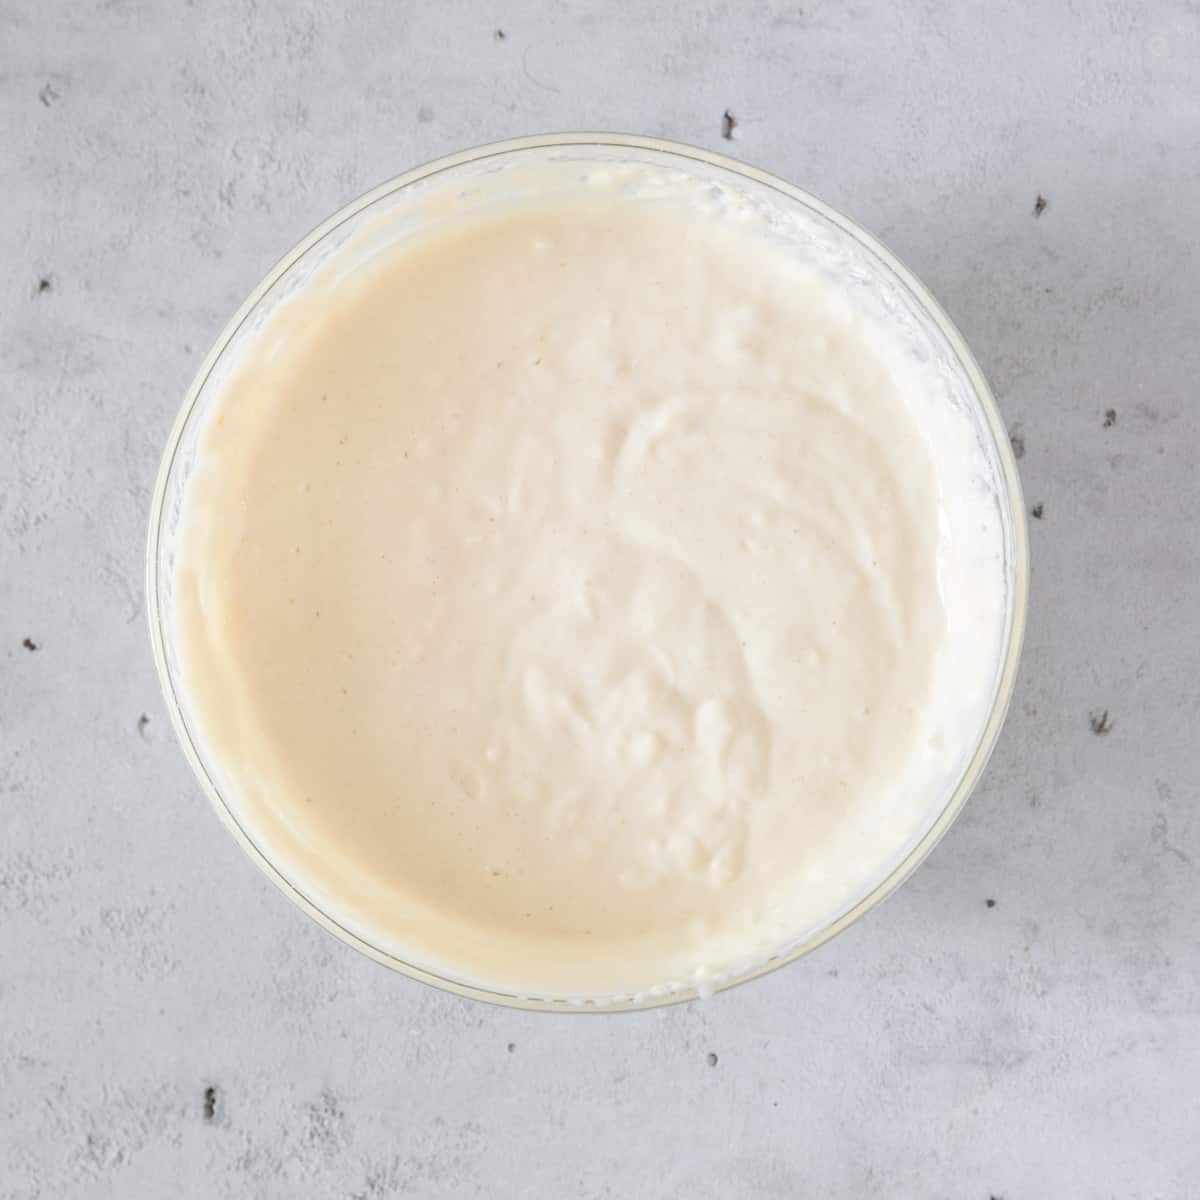 the completed pancake batter in a glass bowl on a grey background.